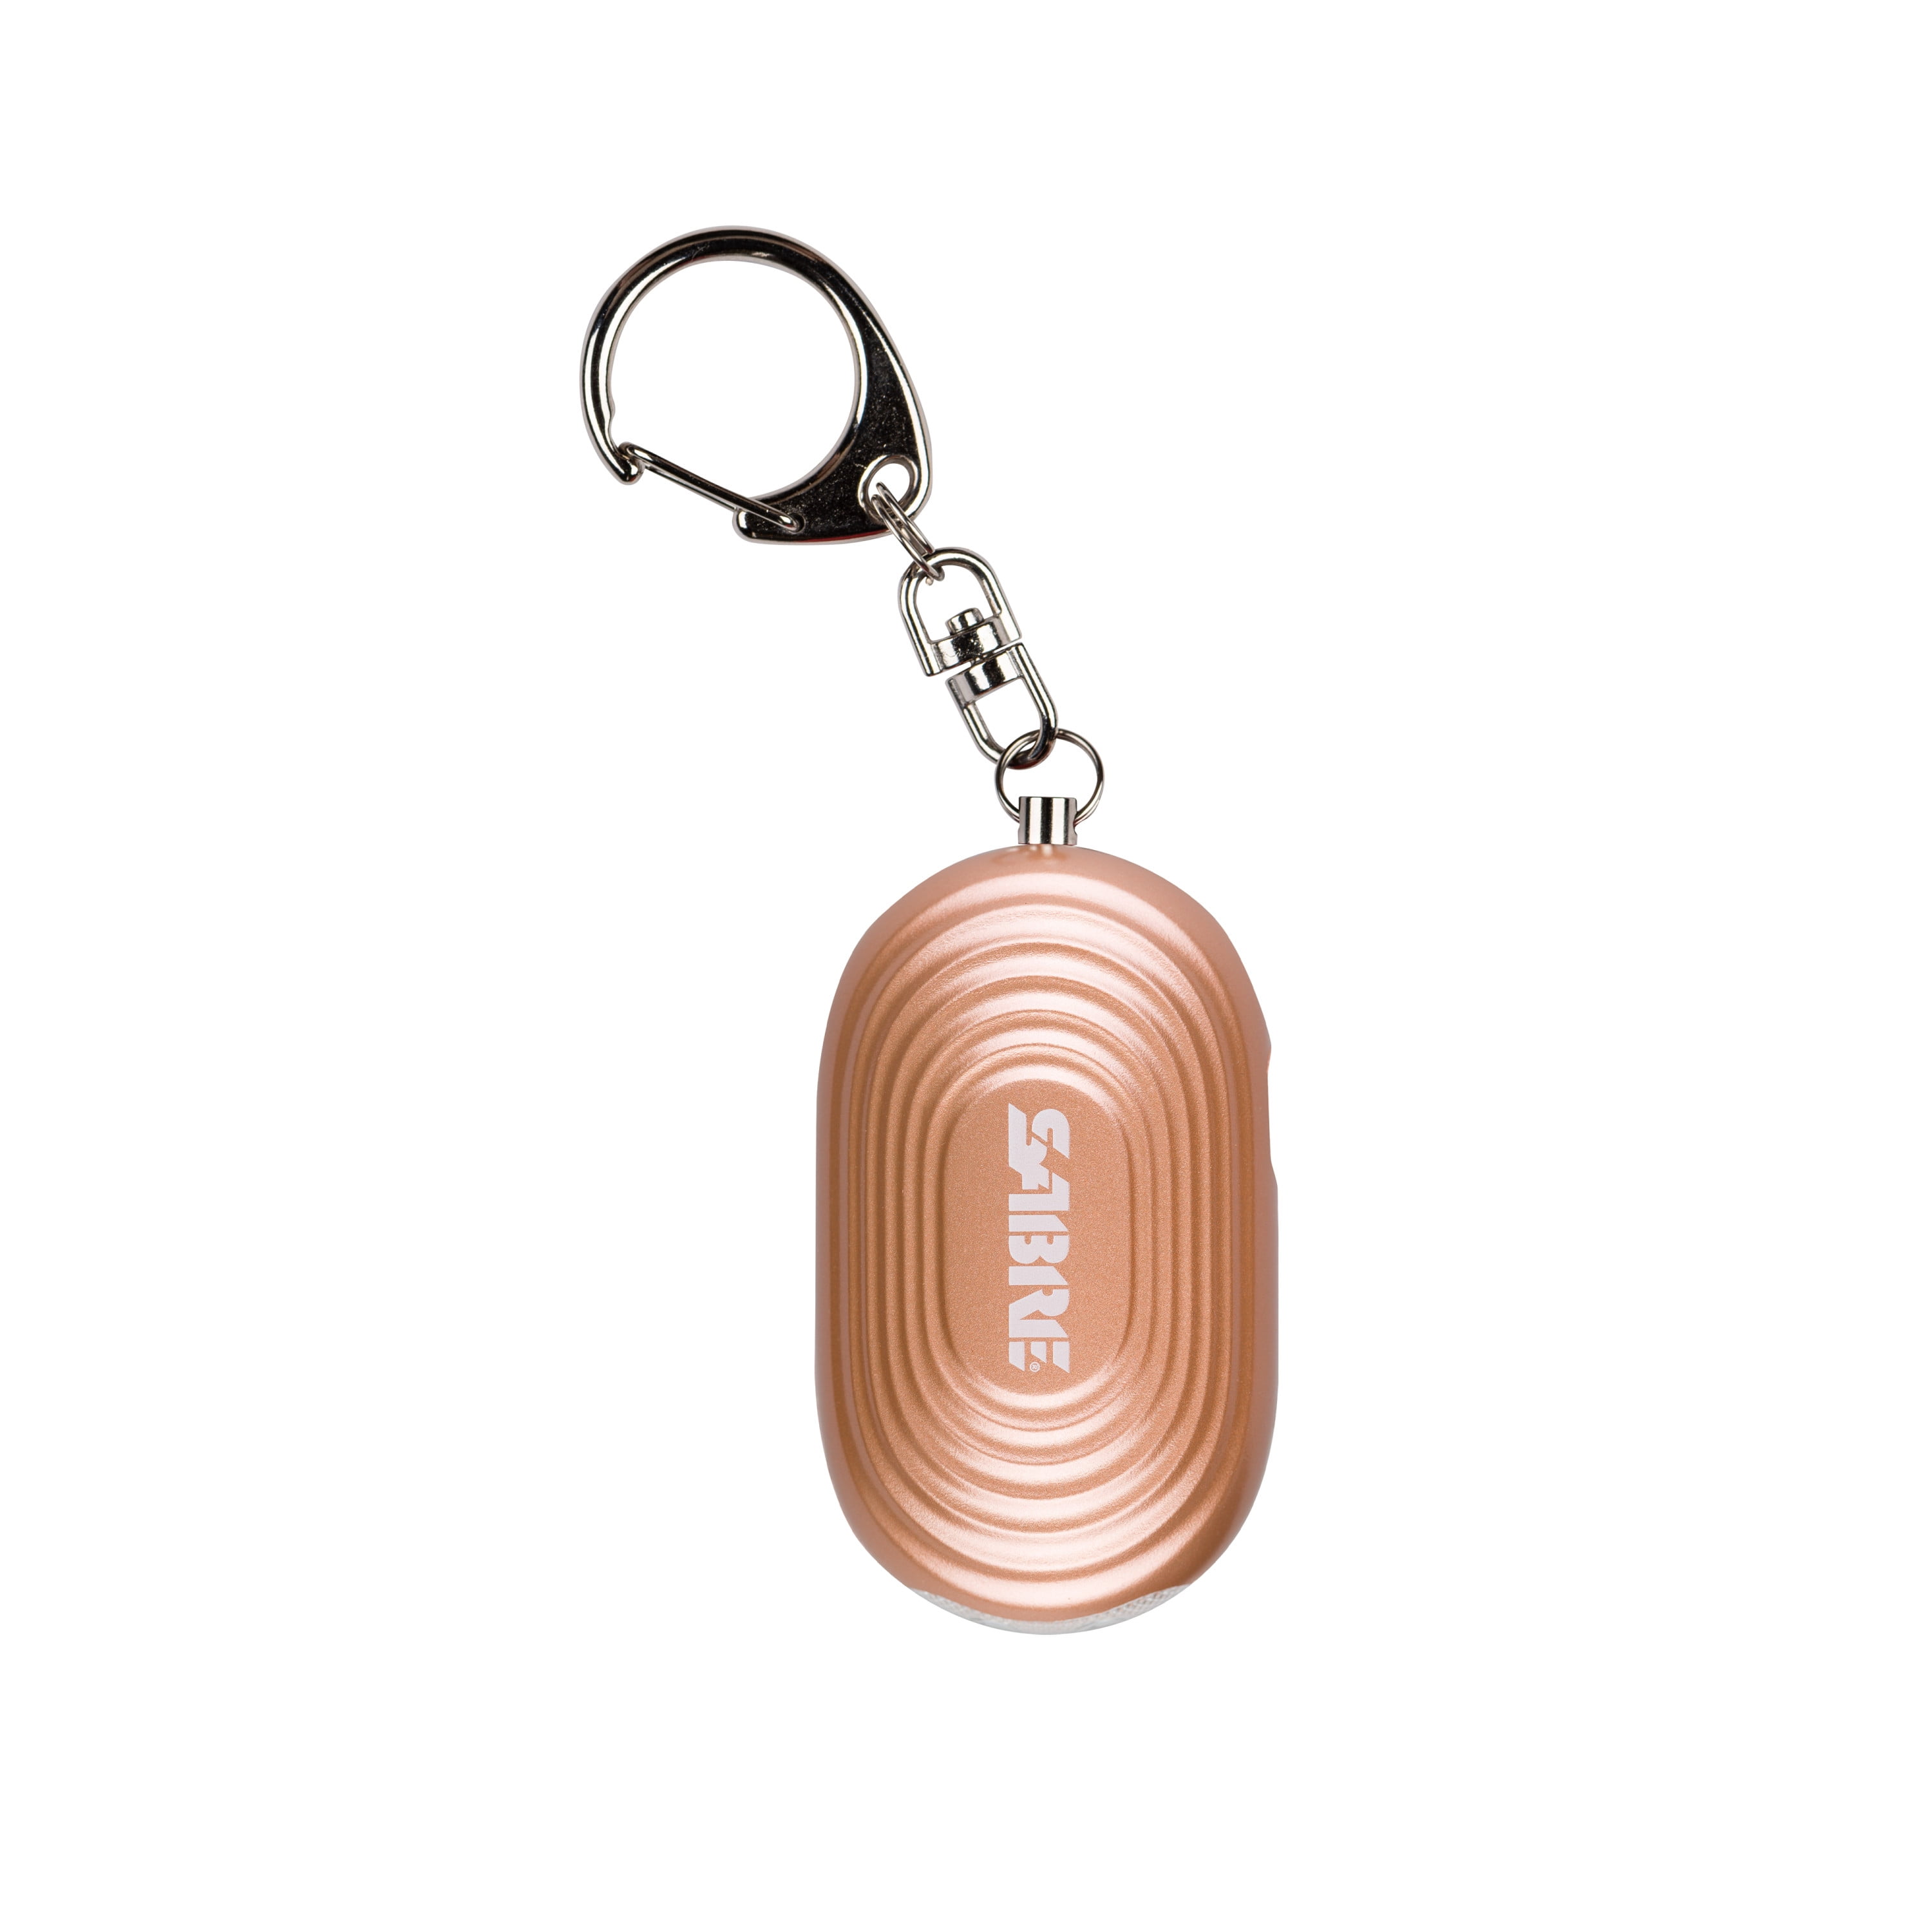 SABRE 2-in-1 Personal Alarm with LED Light and Snap Hook Keychain, Rose Gold